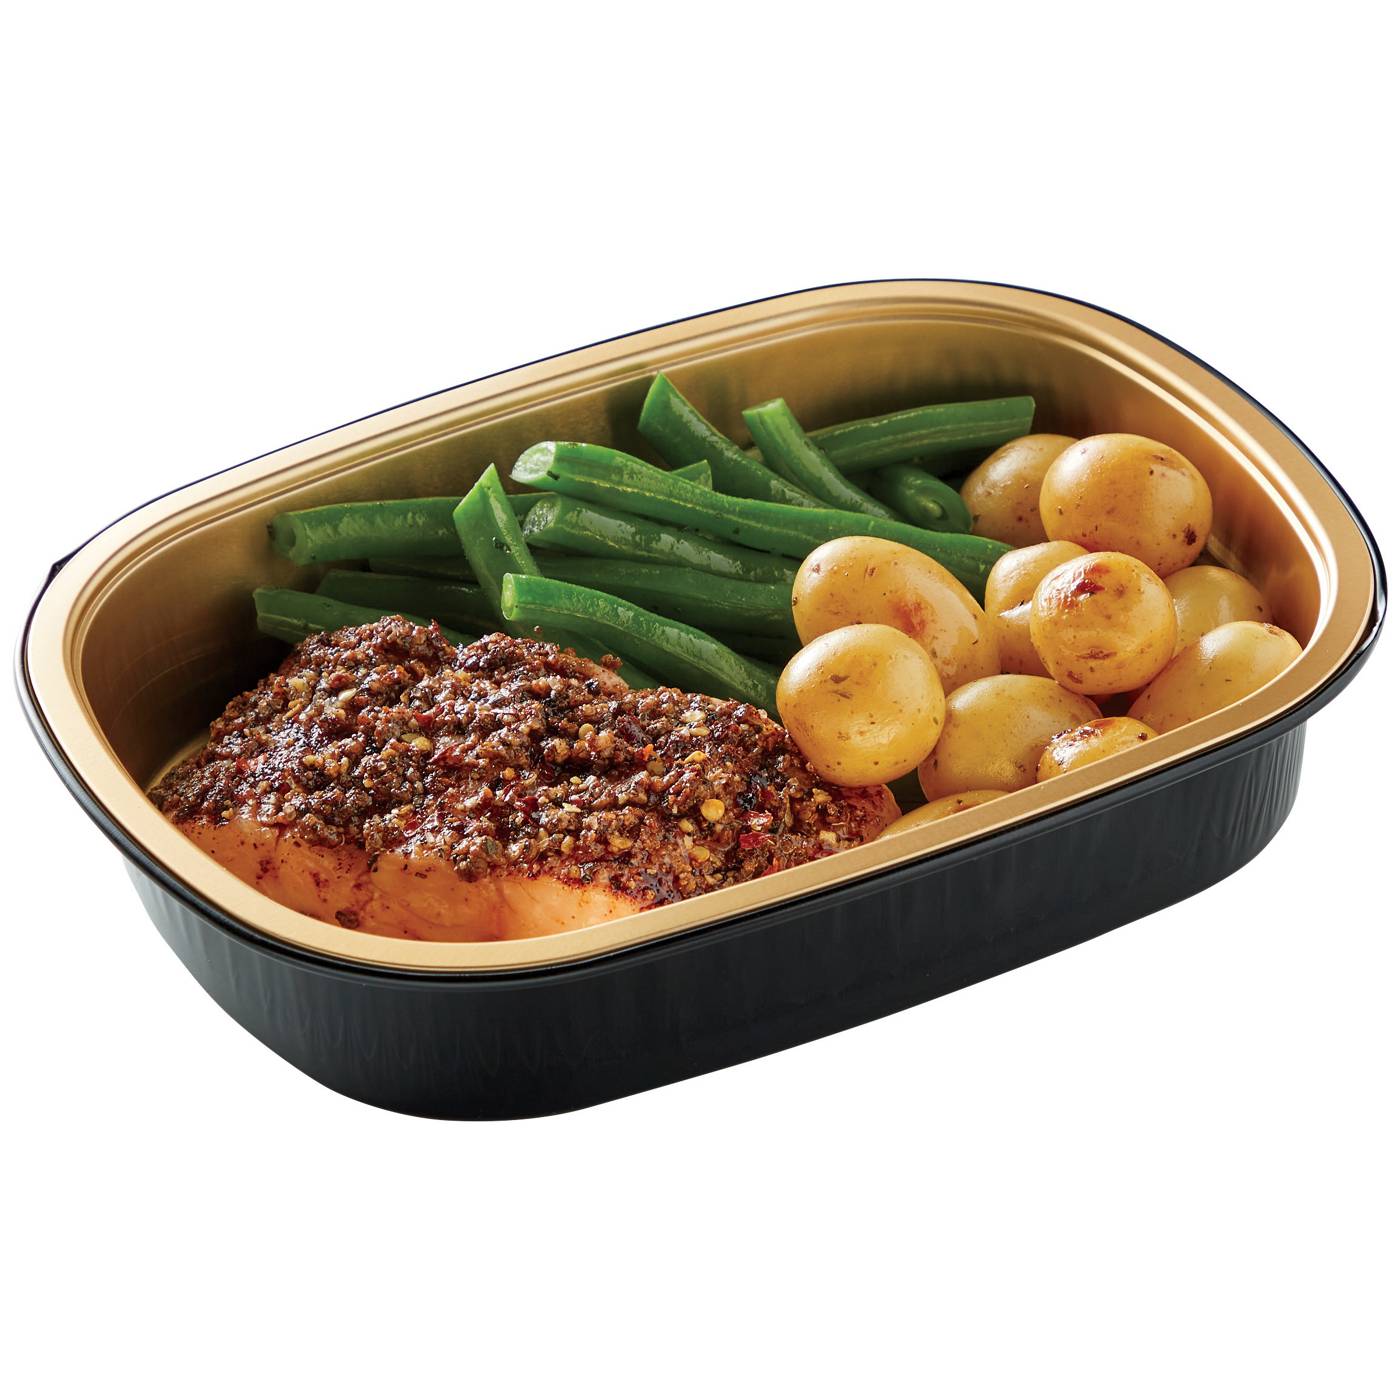 Meal Simple by H-E-B Steakhouse-Seasoned Salmon, Green Beans & Potatoes; image 2 of 3